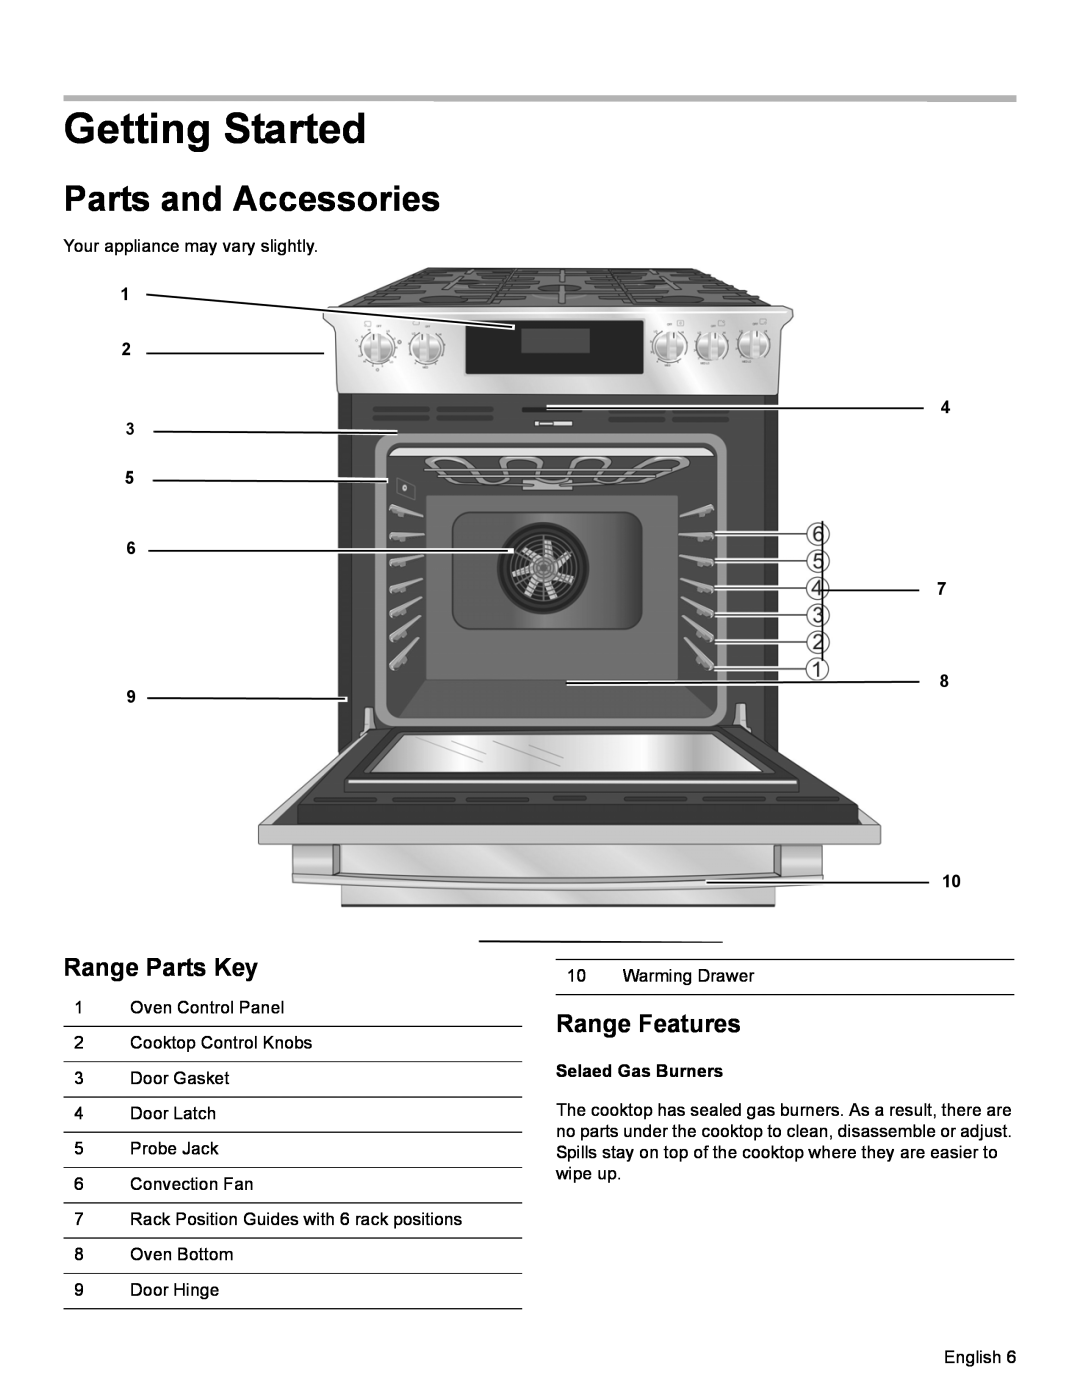 Bosch Appliances HDI8054U Getting Started, Parts and Accessories, Range Parts Key, Range Features, Selaed Gas Burners 